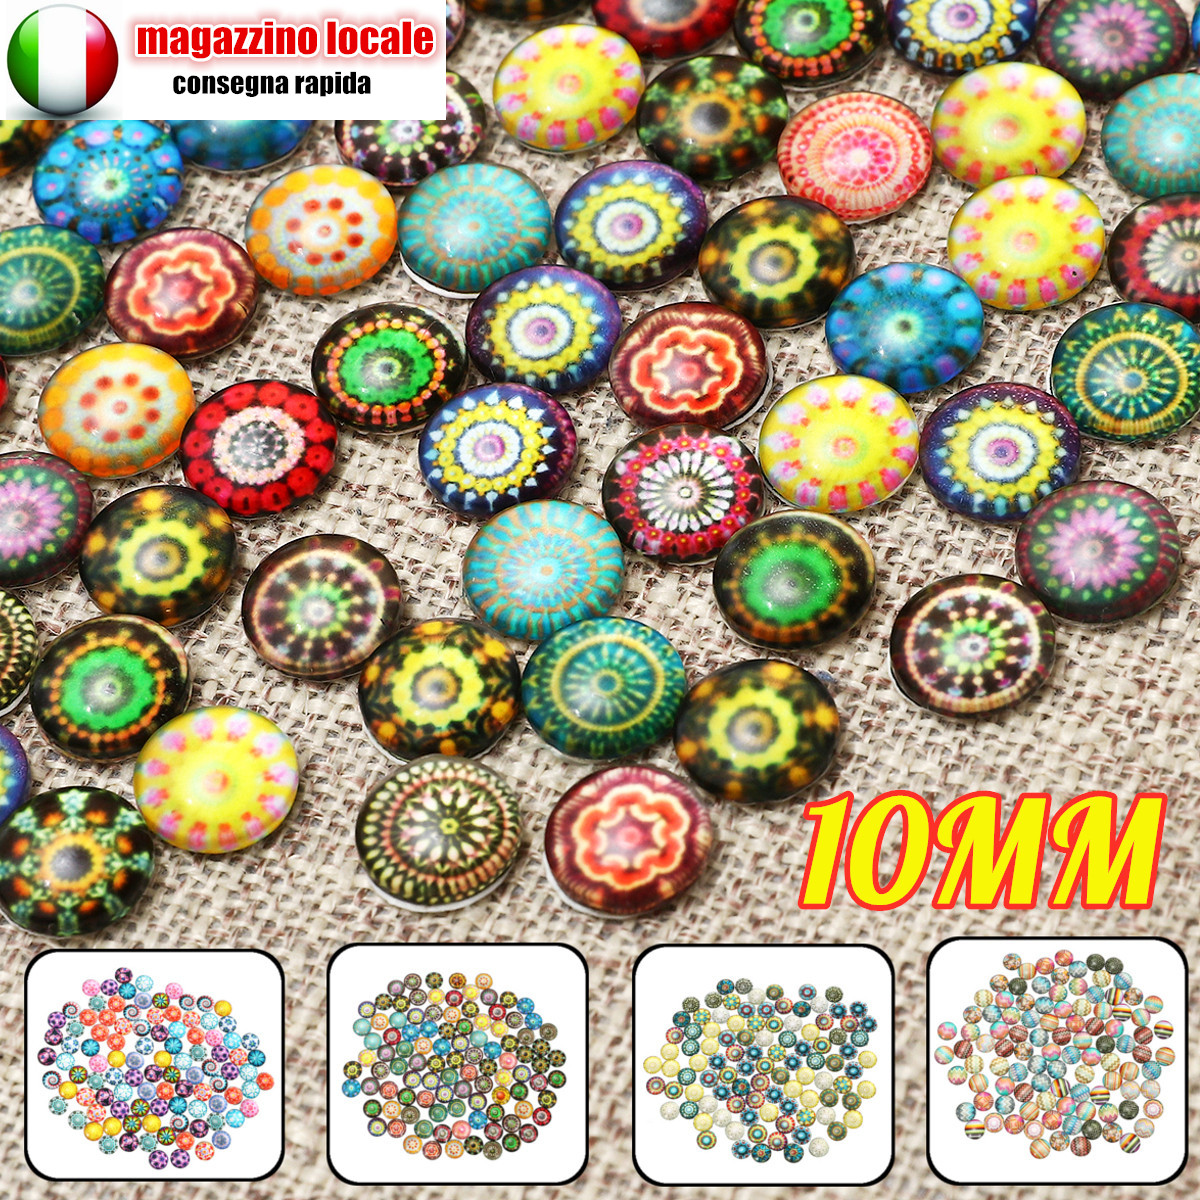 100PcsSet-10MM-Round-Mixed-Supplies-Crafted-Handcrafted-Tiles-For-Jewelry-Making-Decorations-1532873-10